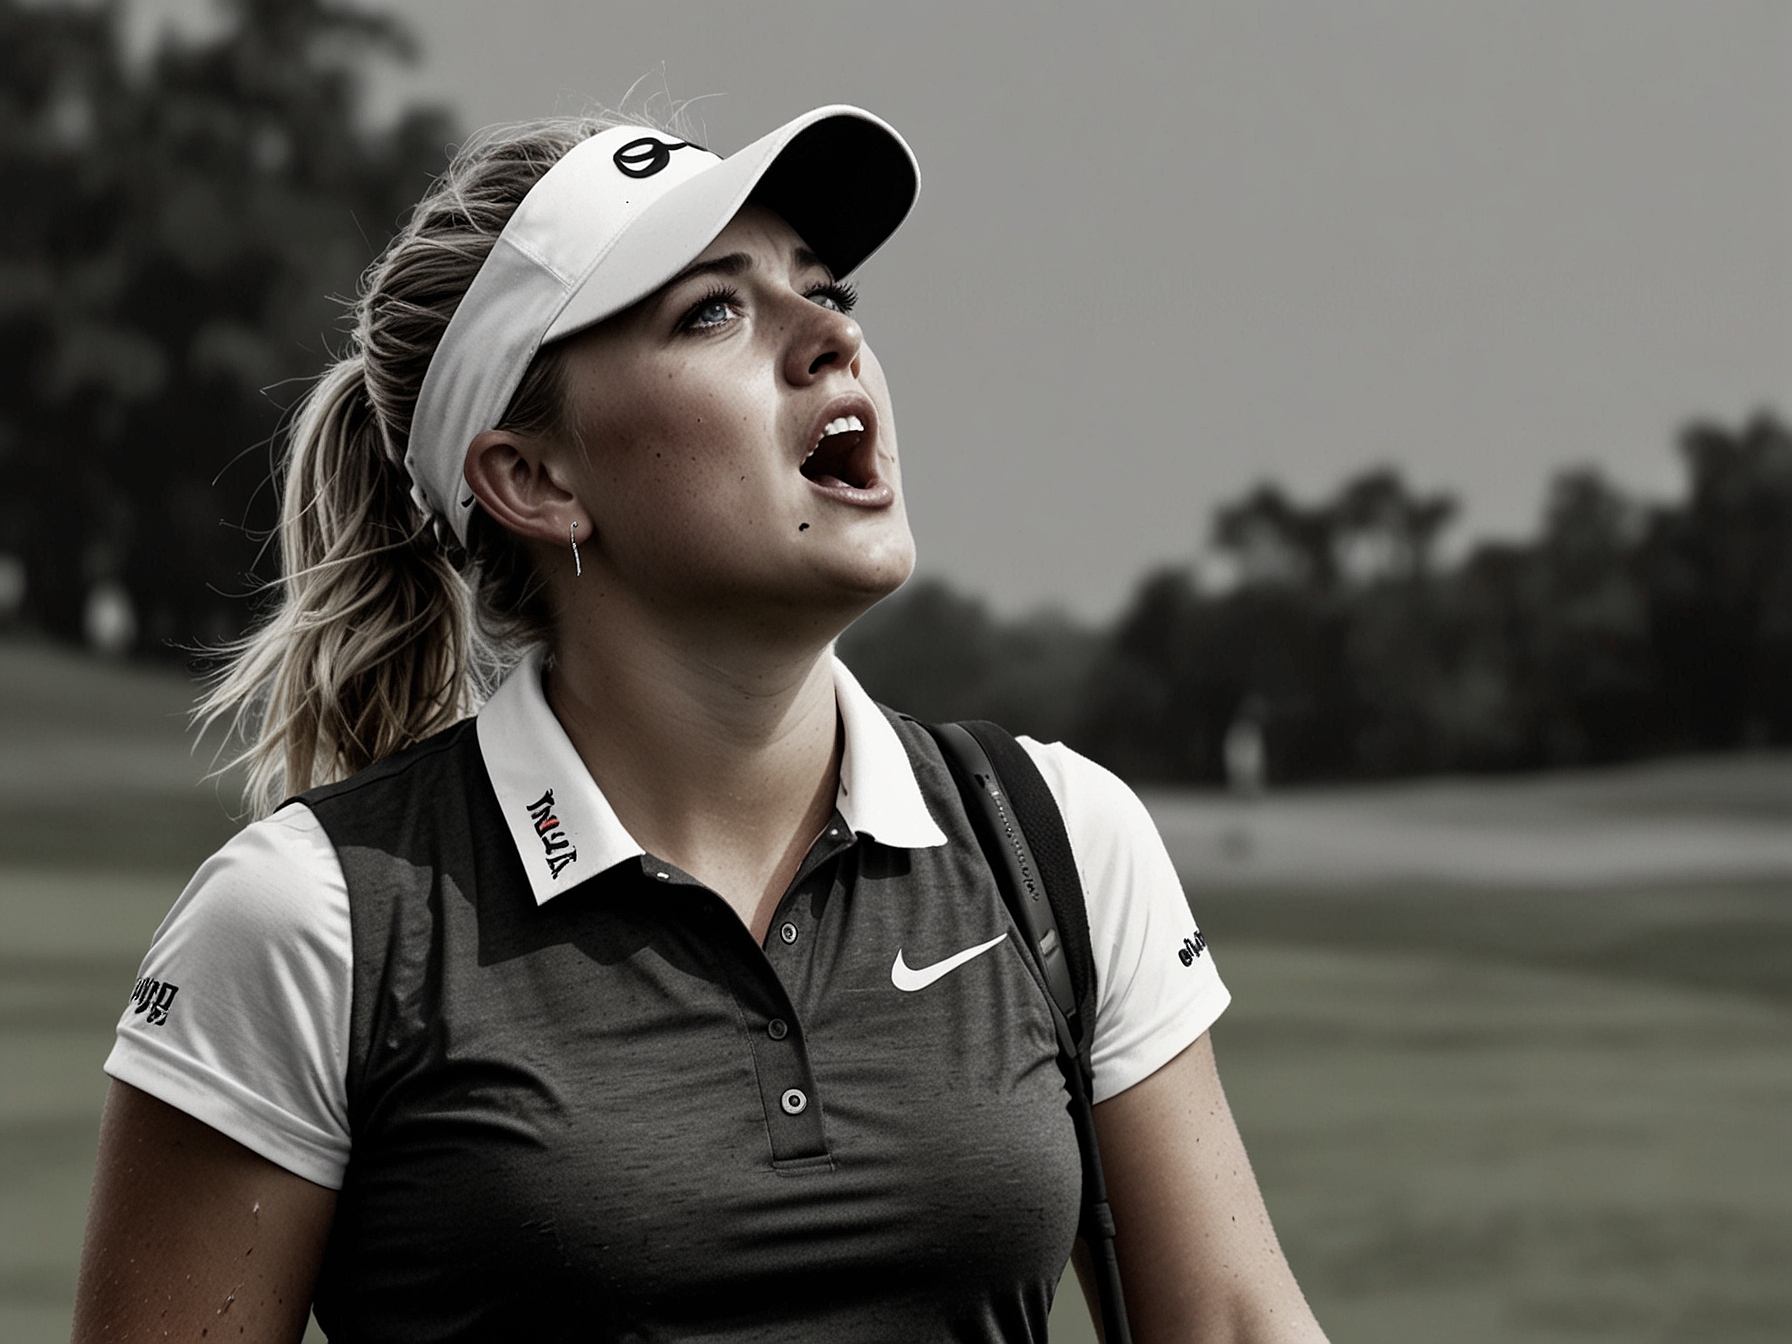 Charley Hull reacts in frustration after a misjudged putt on the 16th green, a crucial moment that impacted her round at the Women’s PGA Championship. Her intense determination is evident.